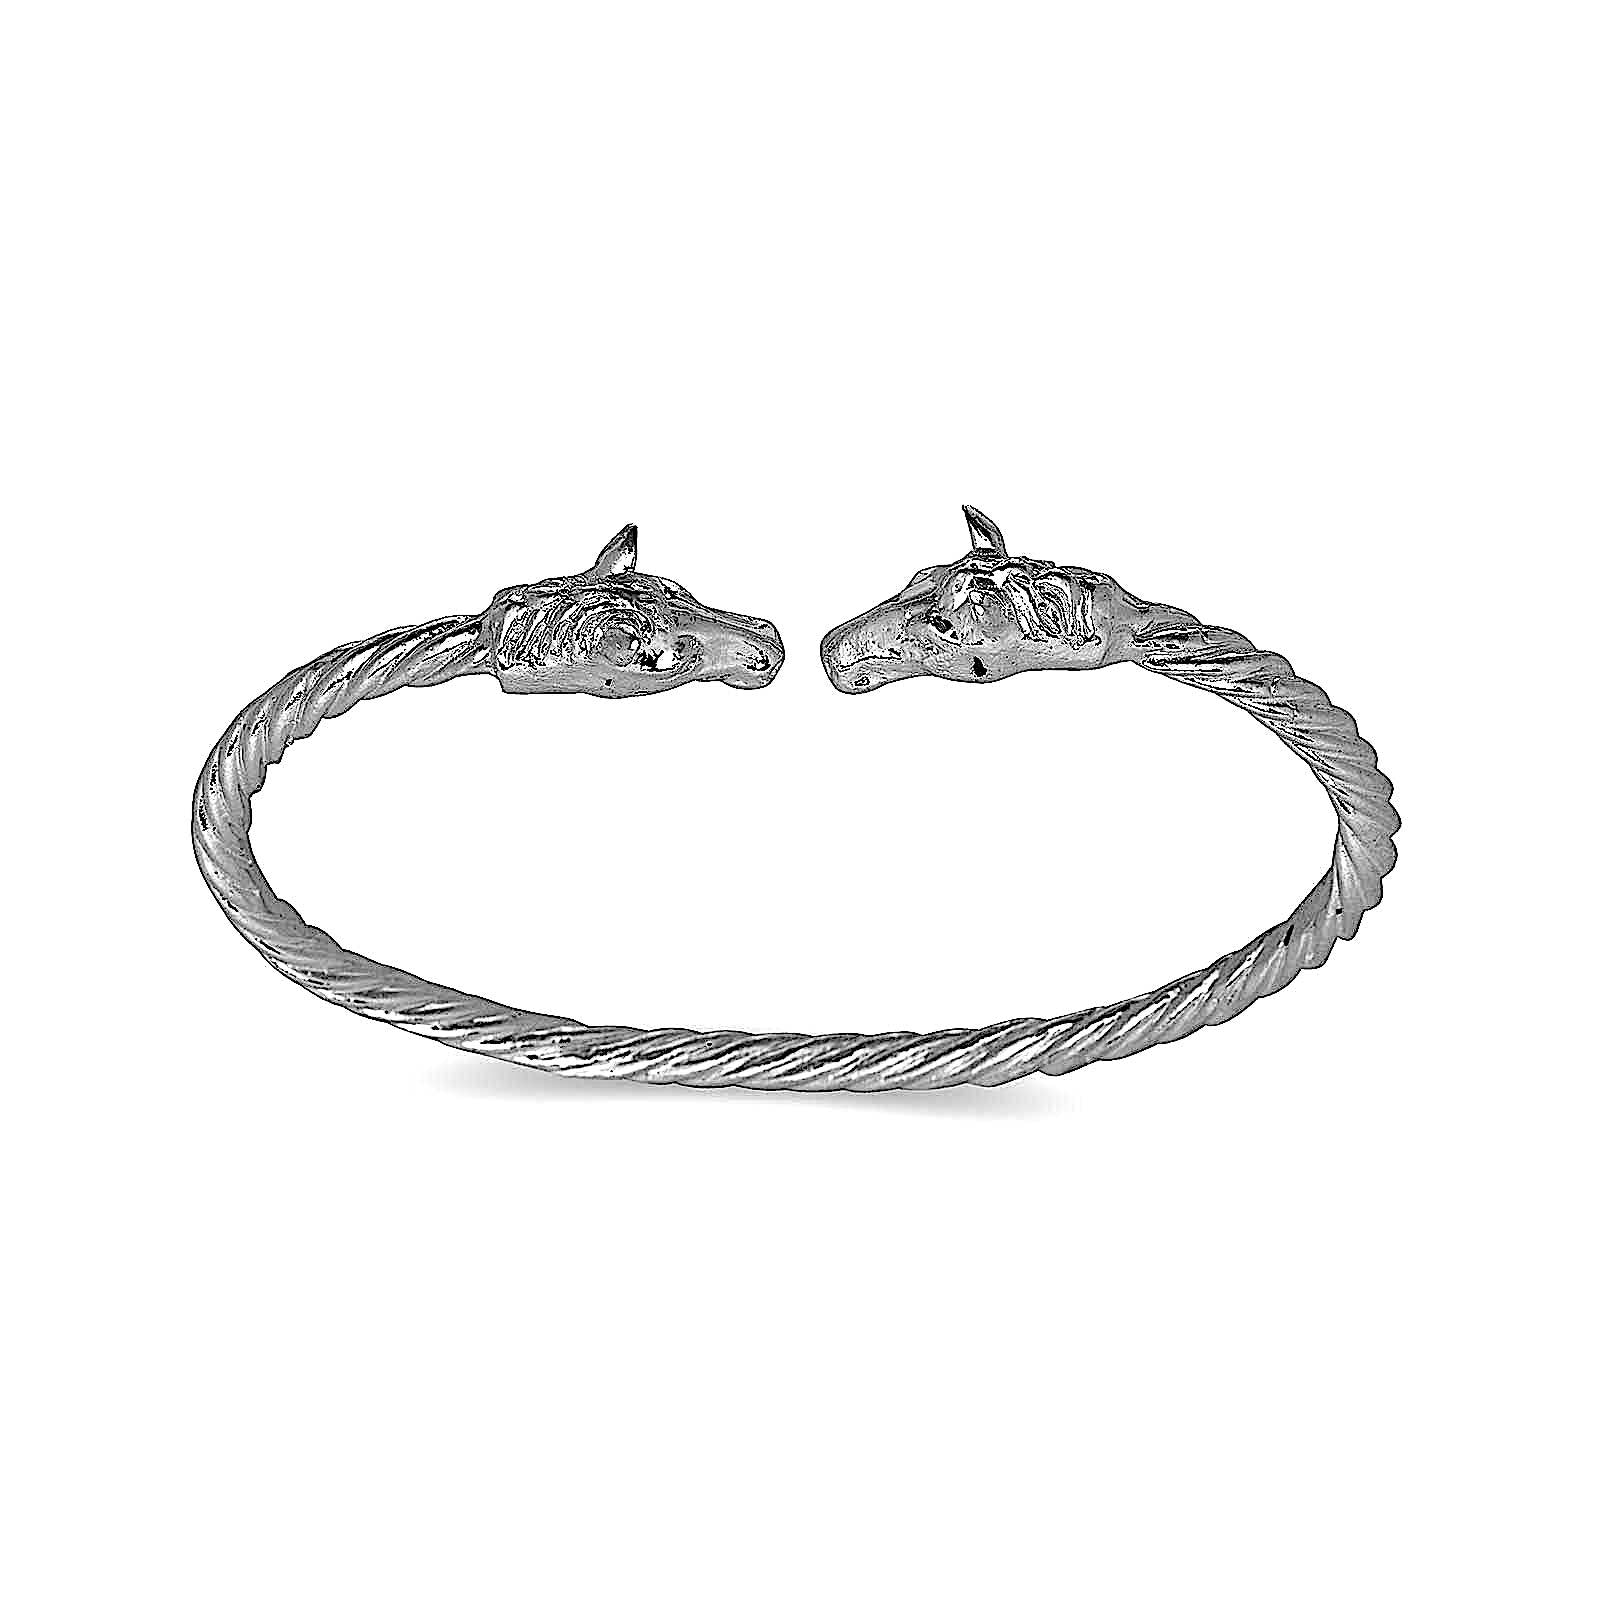 Horse ends coiled rope West Indian bangle 925 Sterling silver (MADE IN USA) - Betterjewelry